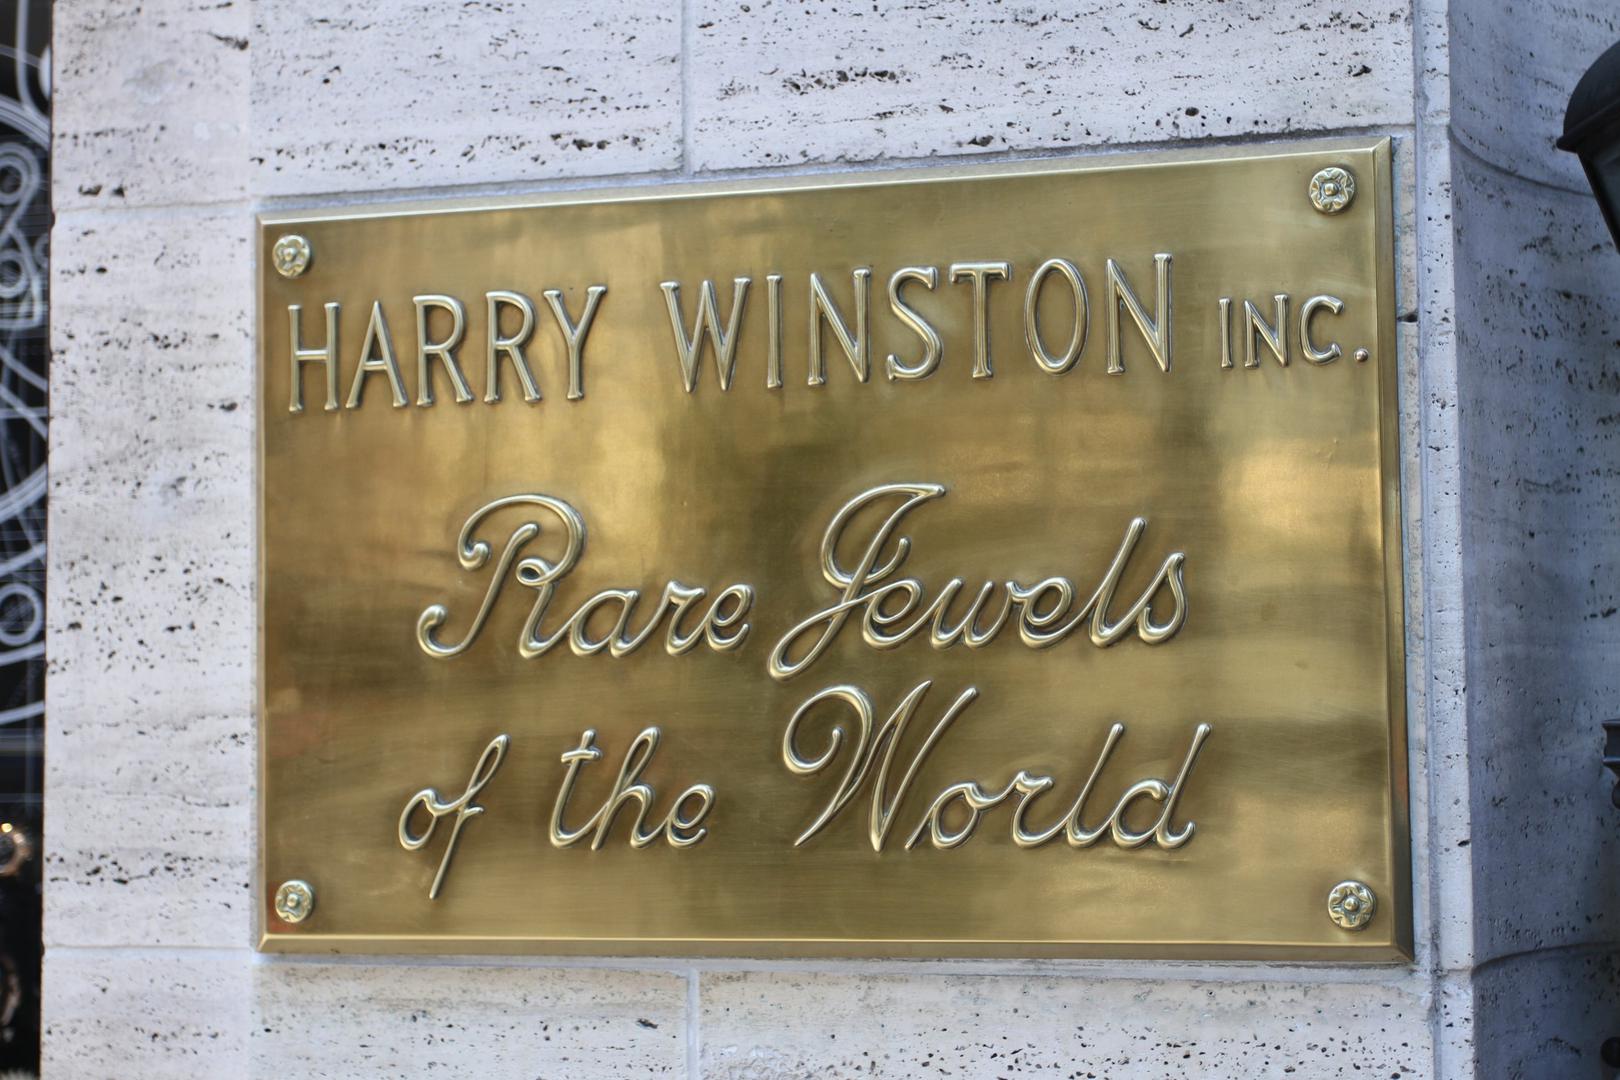 The plaque on the Harry Winston Inc. flagship store in New York, US, August 2013. 